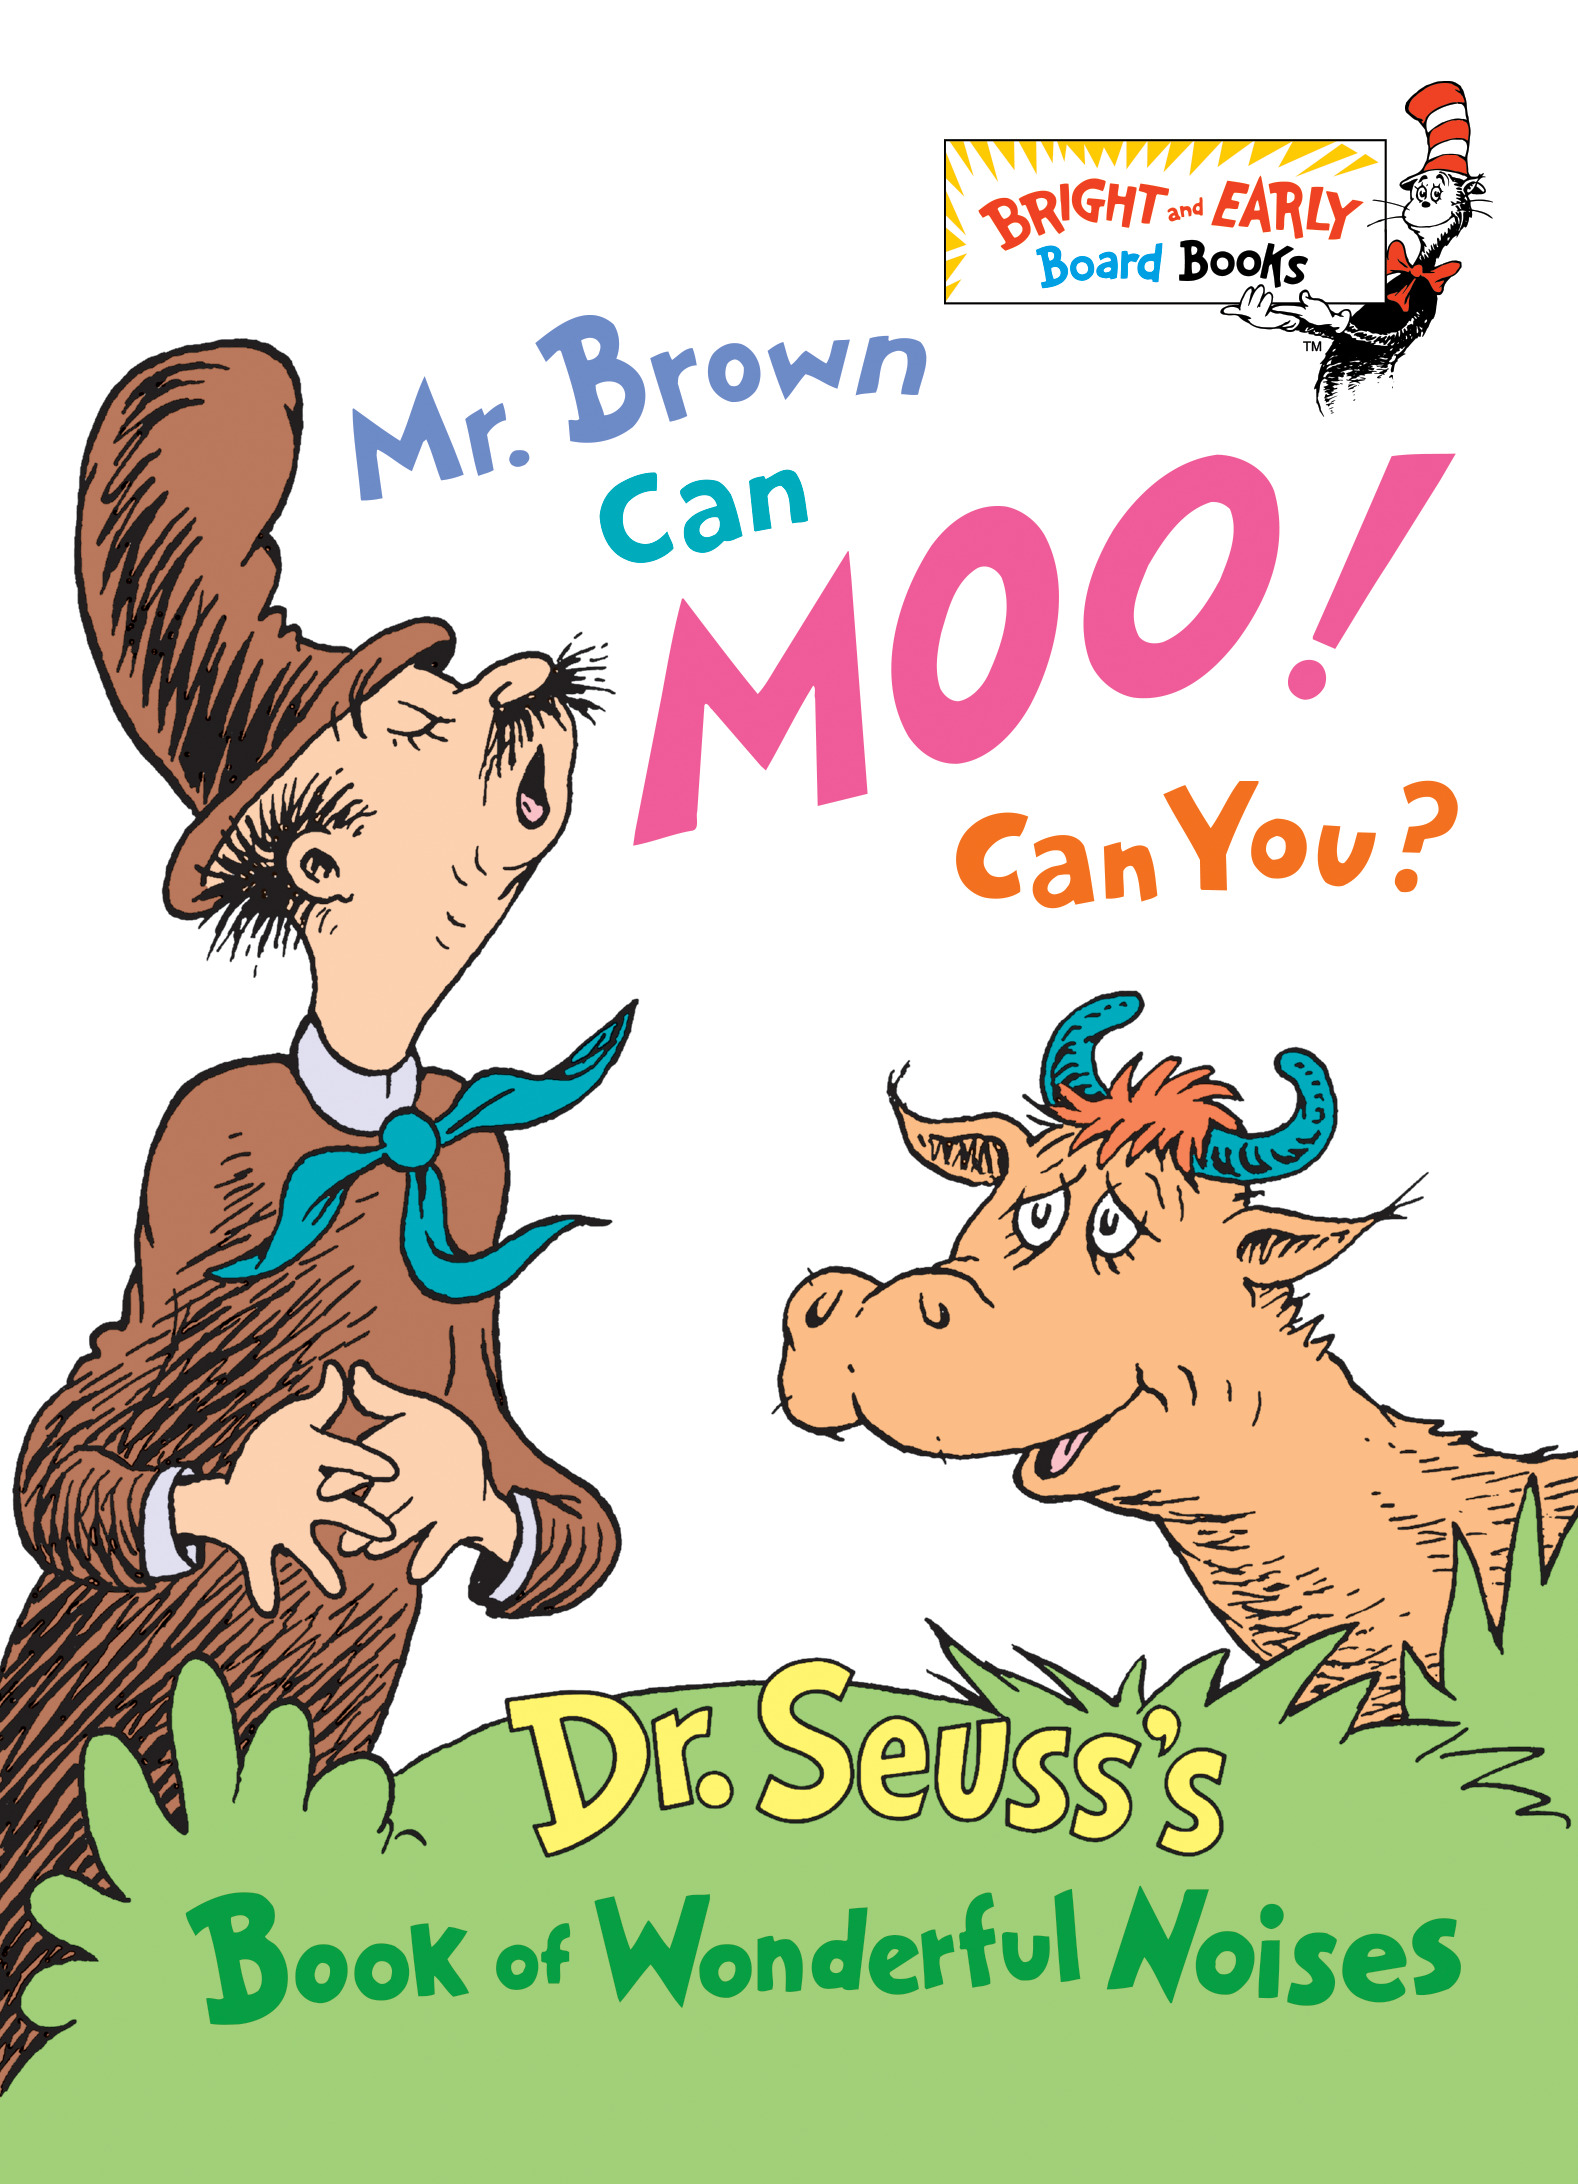 Mr. Brown Can Moo! Can You? : Dr. Seuss's Book of Wonderful Noises | Dr. Seuss